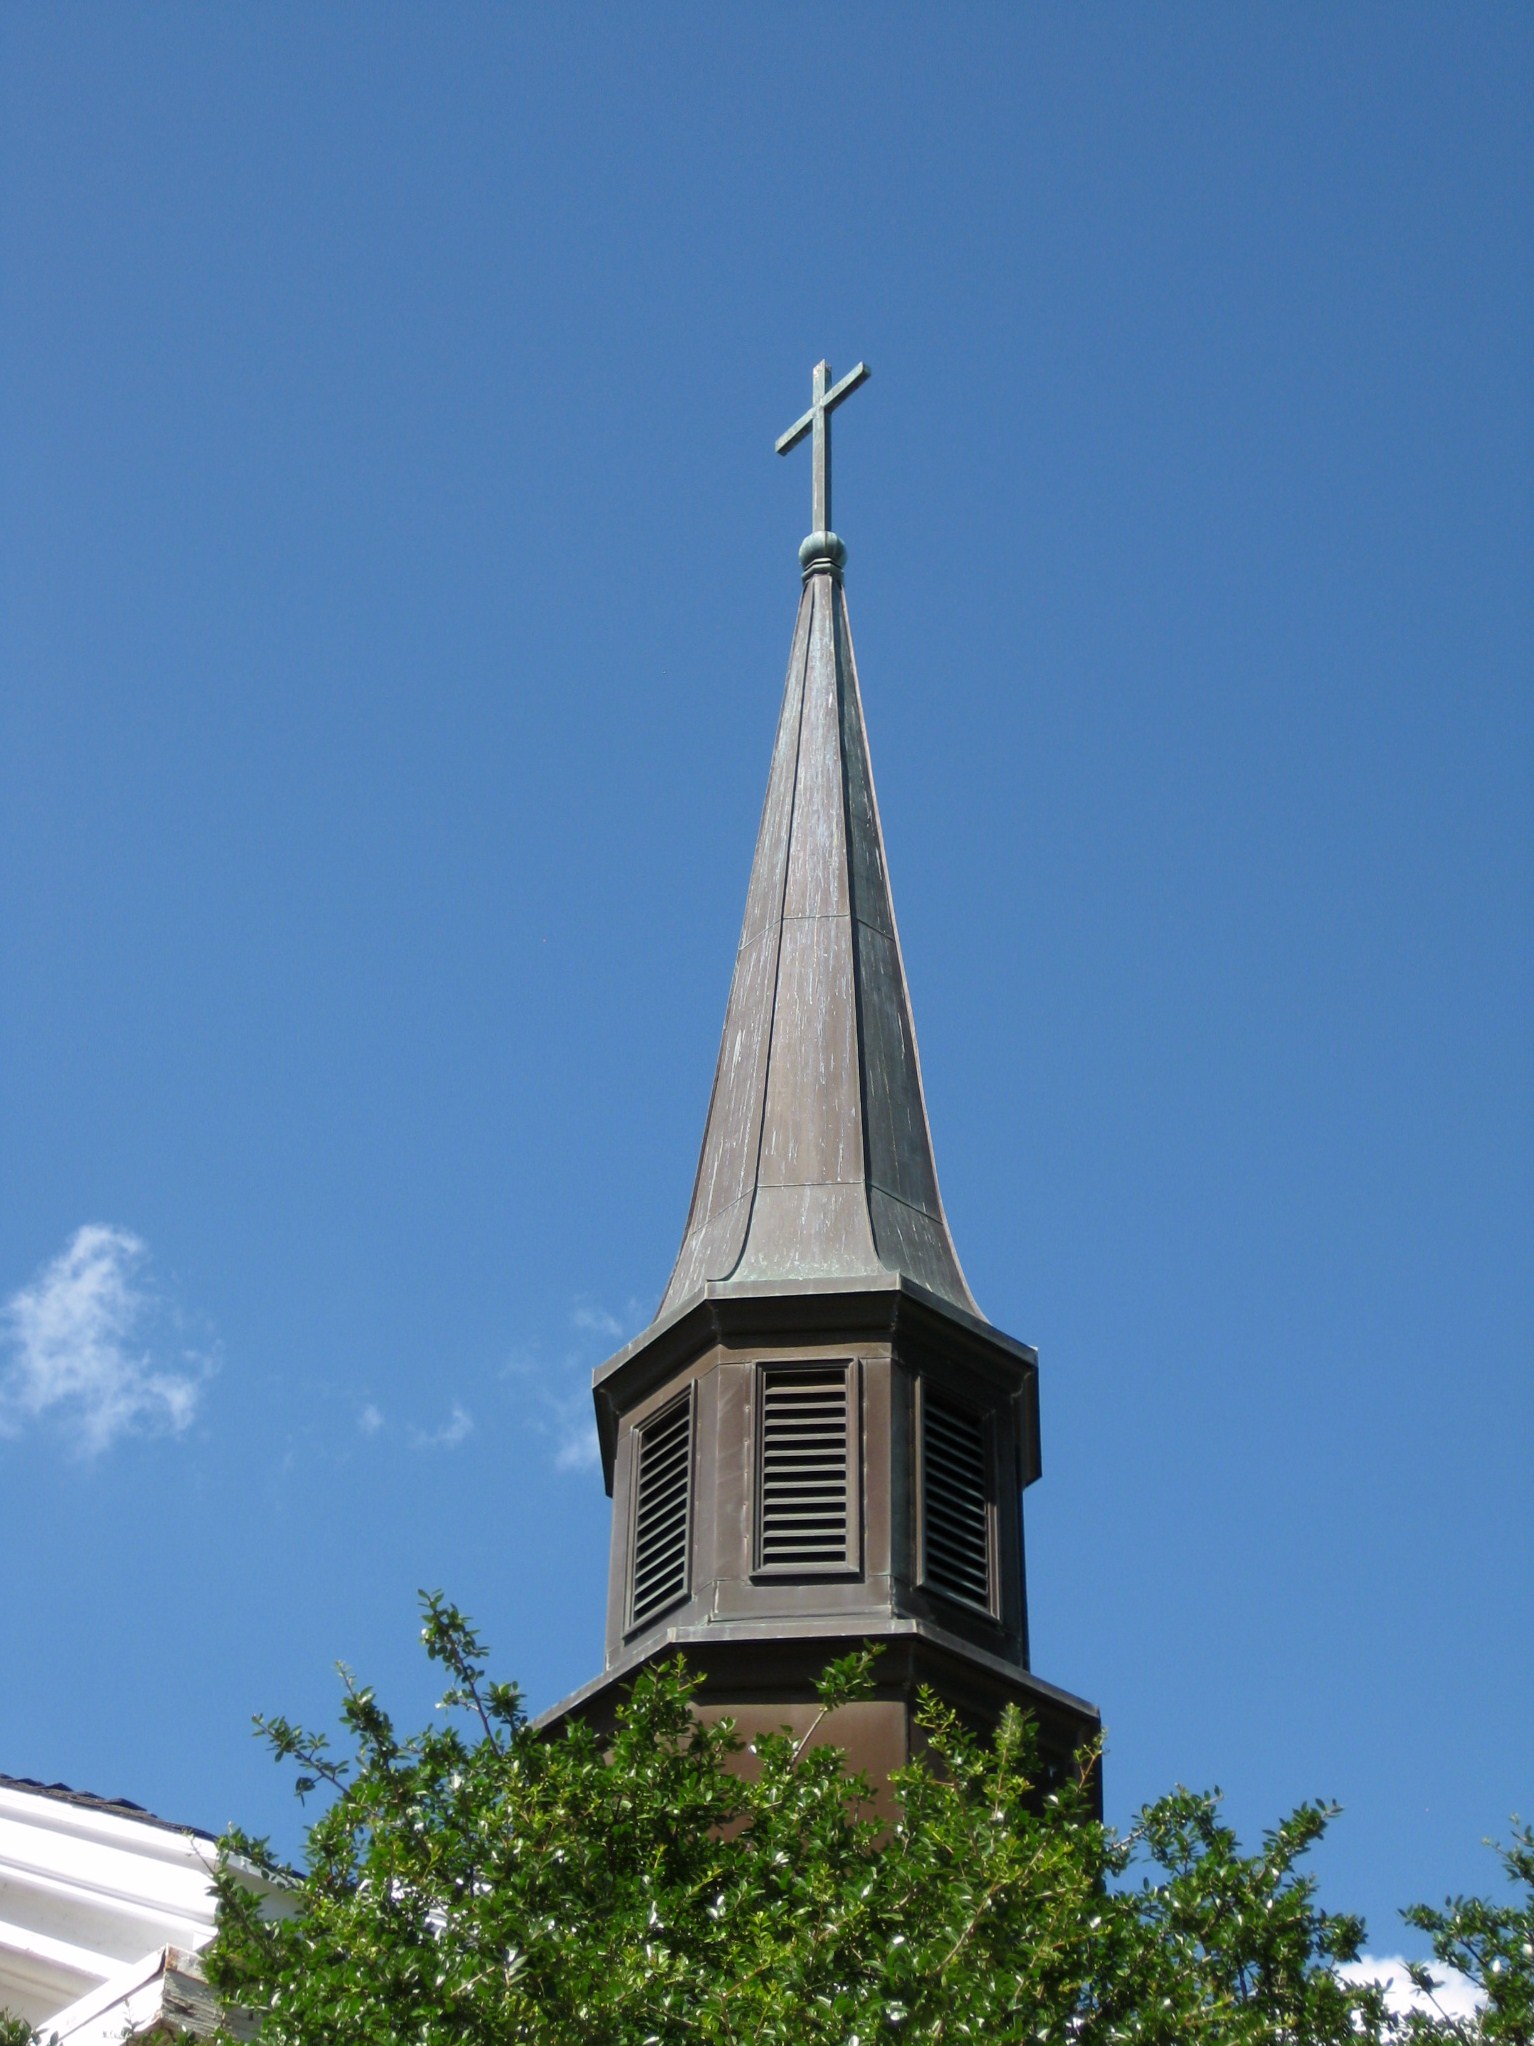 a very tall church tower with a cross on top